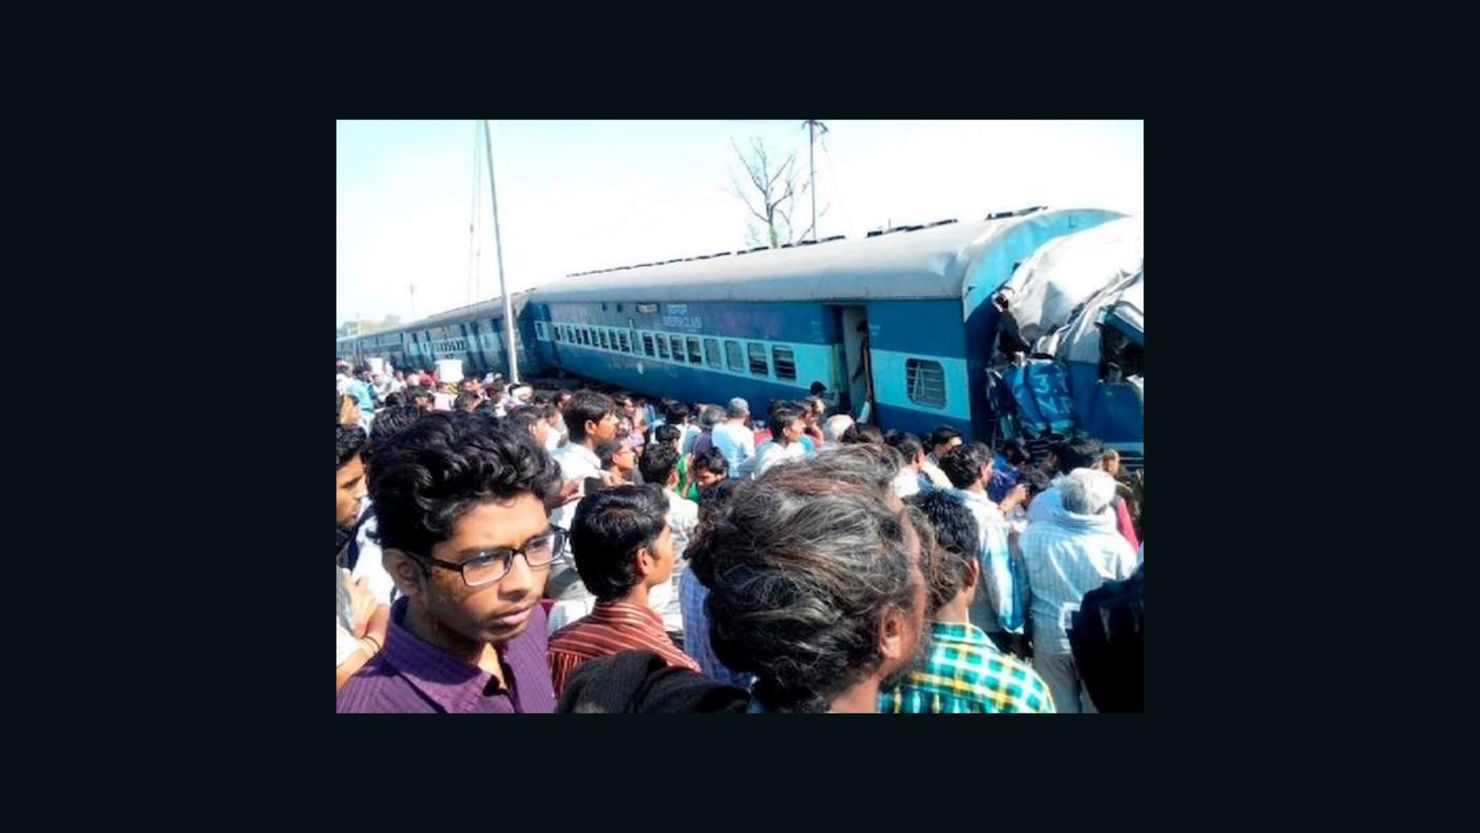 A crowd watches as emergency workers help victims of a passenger train derailment in India's Uttar Pradesh state on Friday.